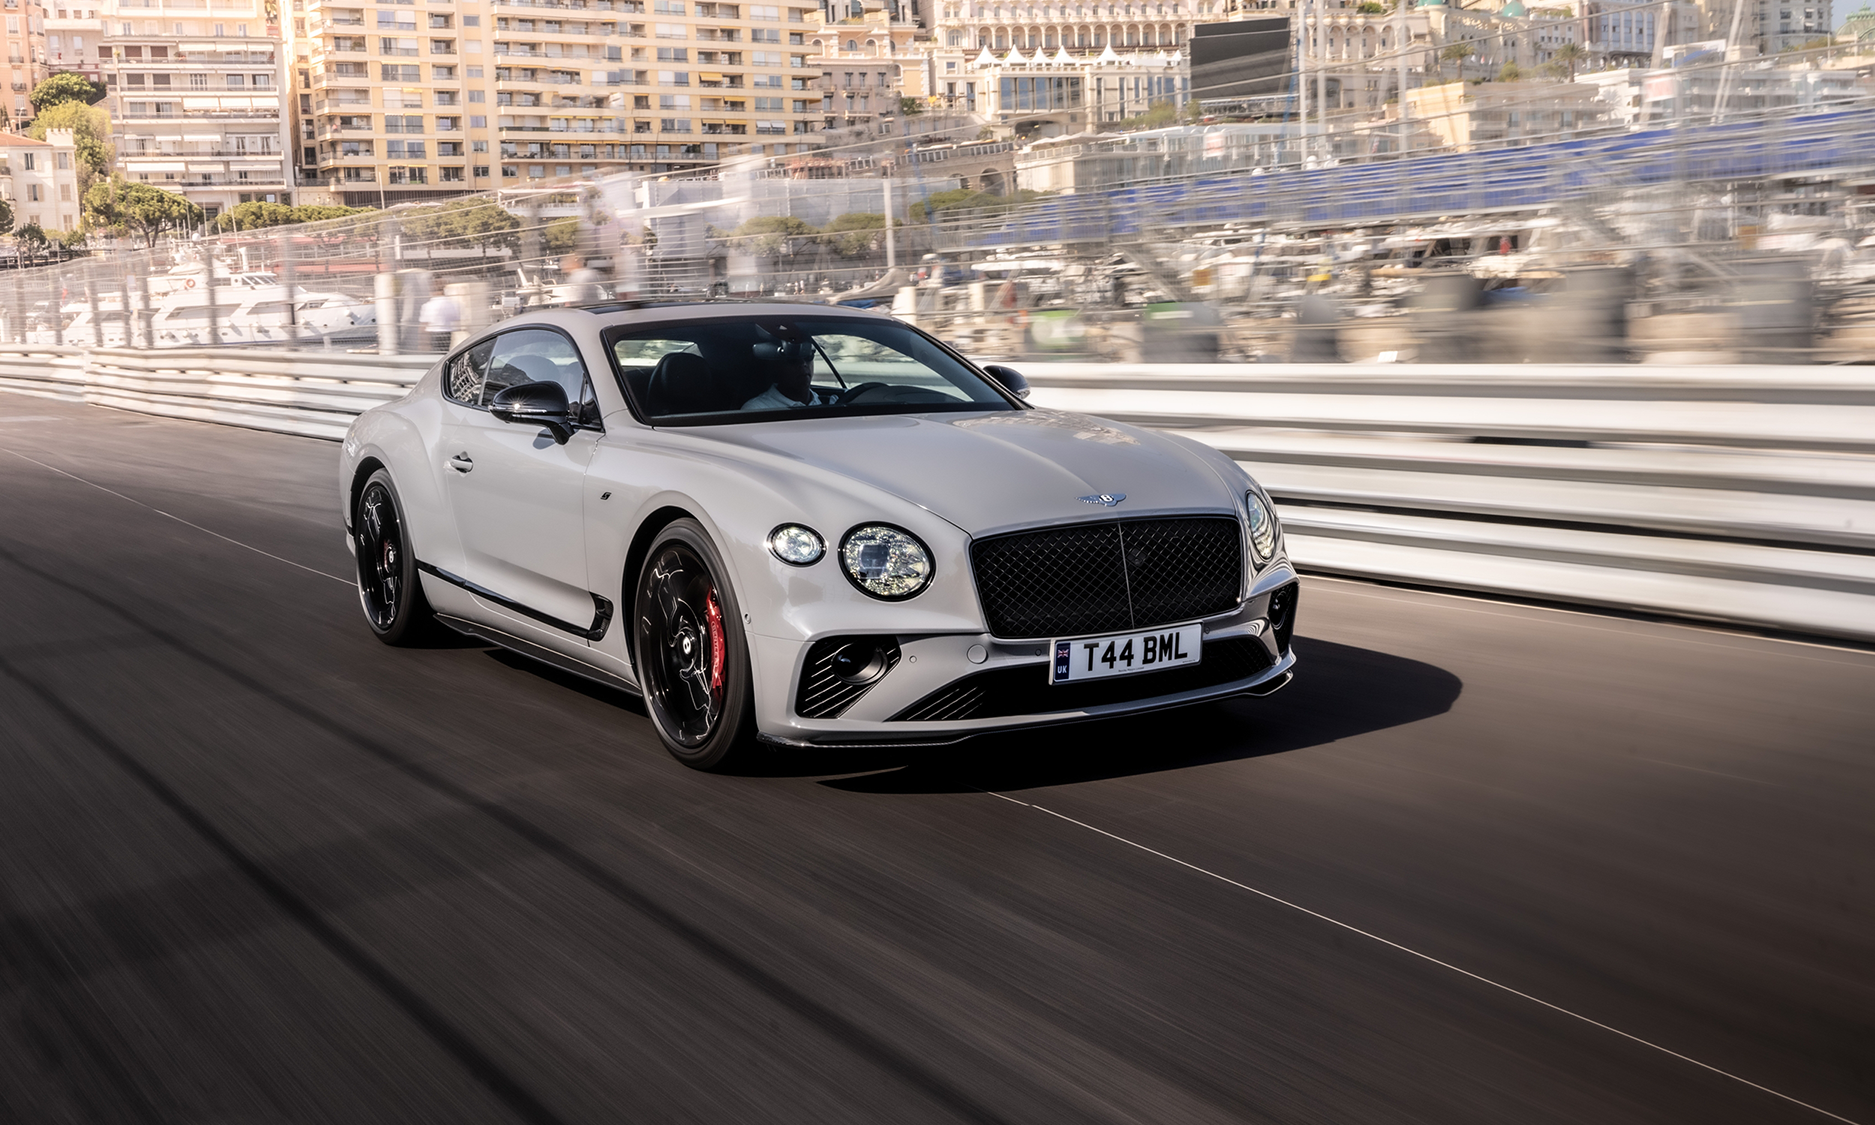 Bentley Showcased New “S Range” Continental GT and GTC S